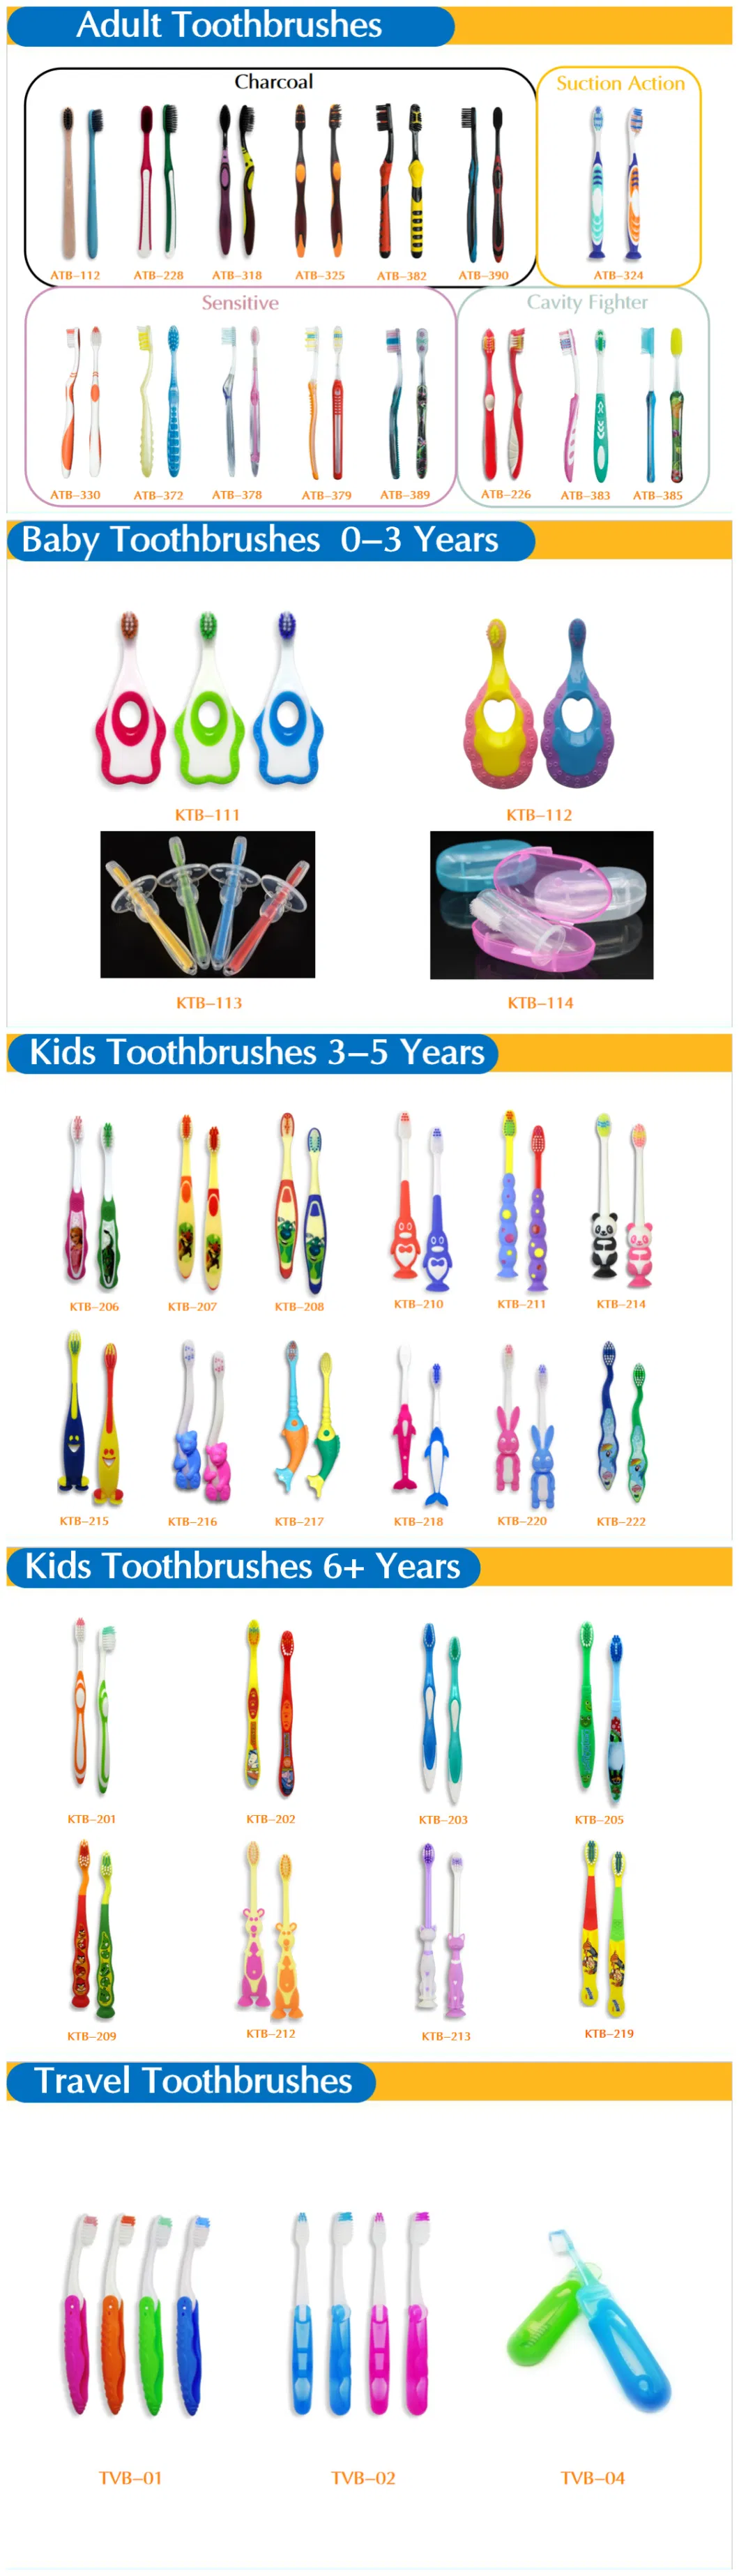 Personalized Grown-up Dental Care Brush with Gum Soothing and Tongue Refreshment